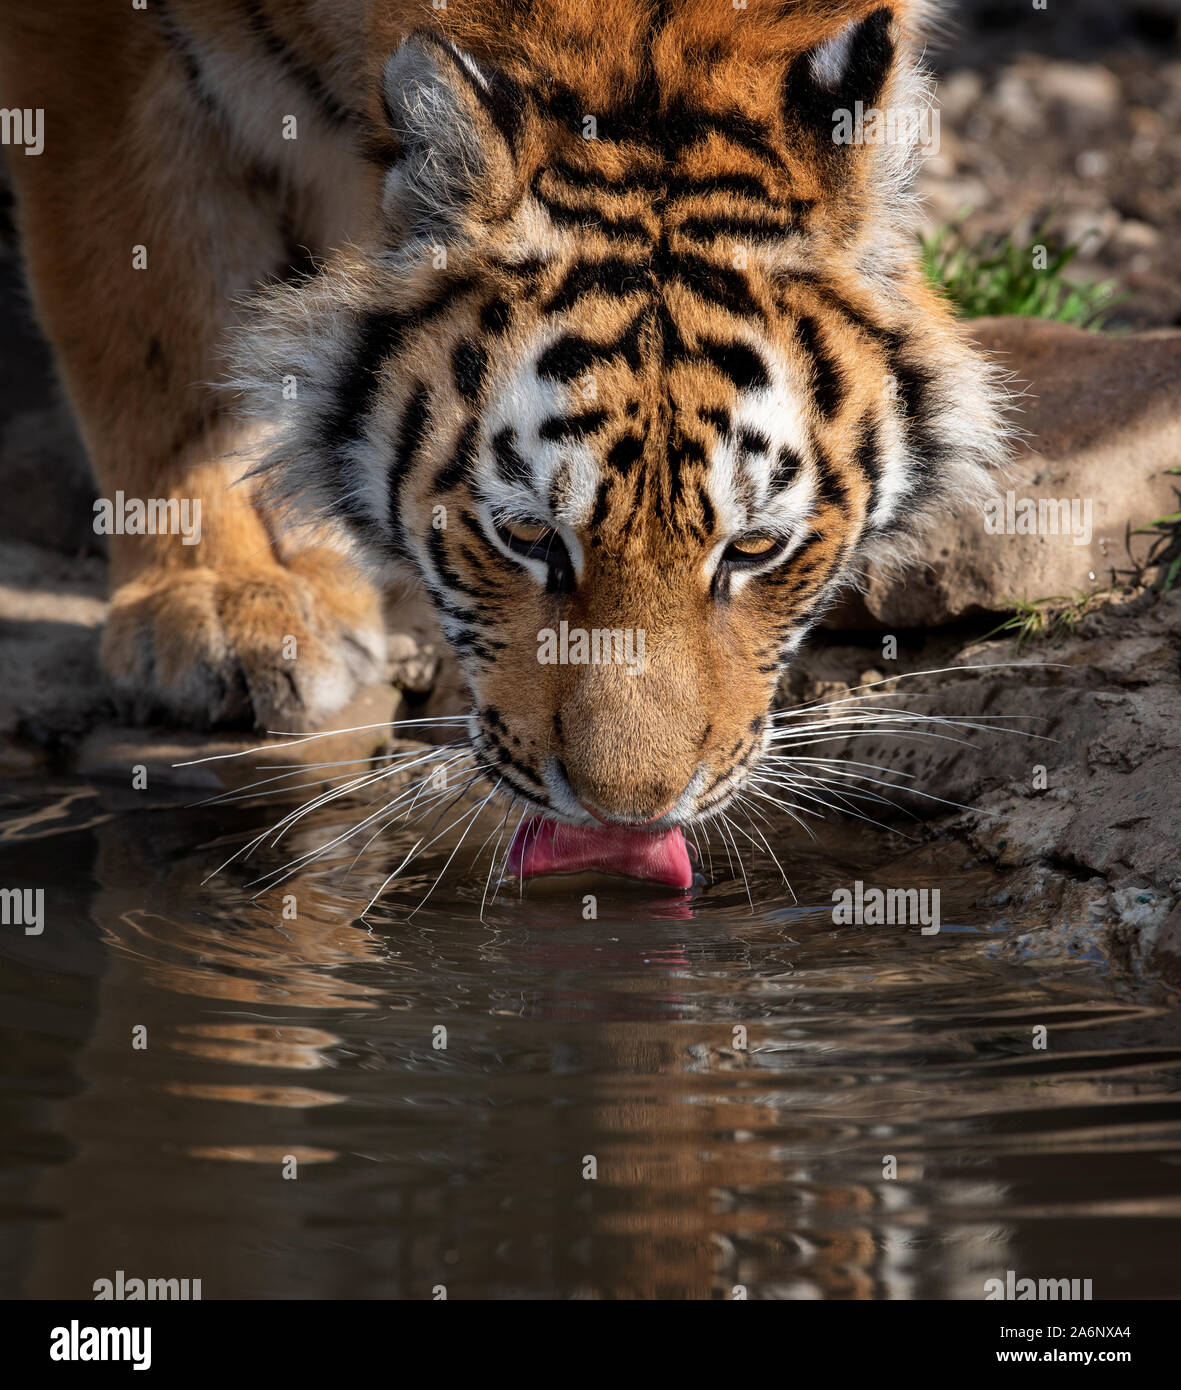 Tiger male drinking water. Wildlife scene with danger animal Stock Photo